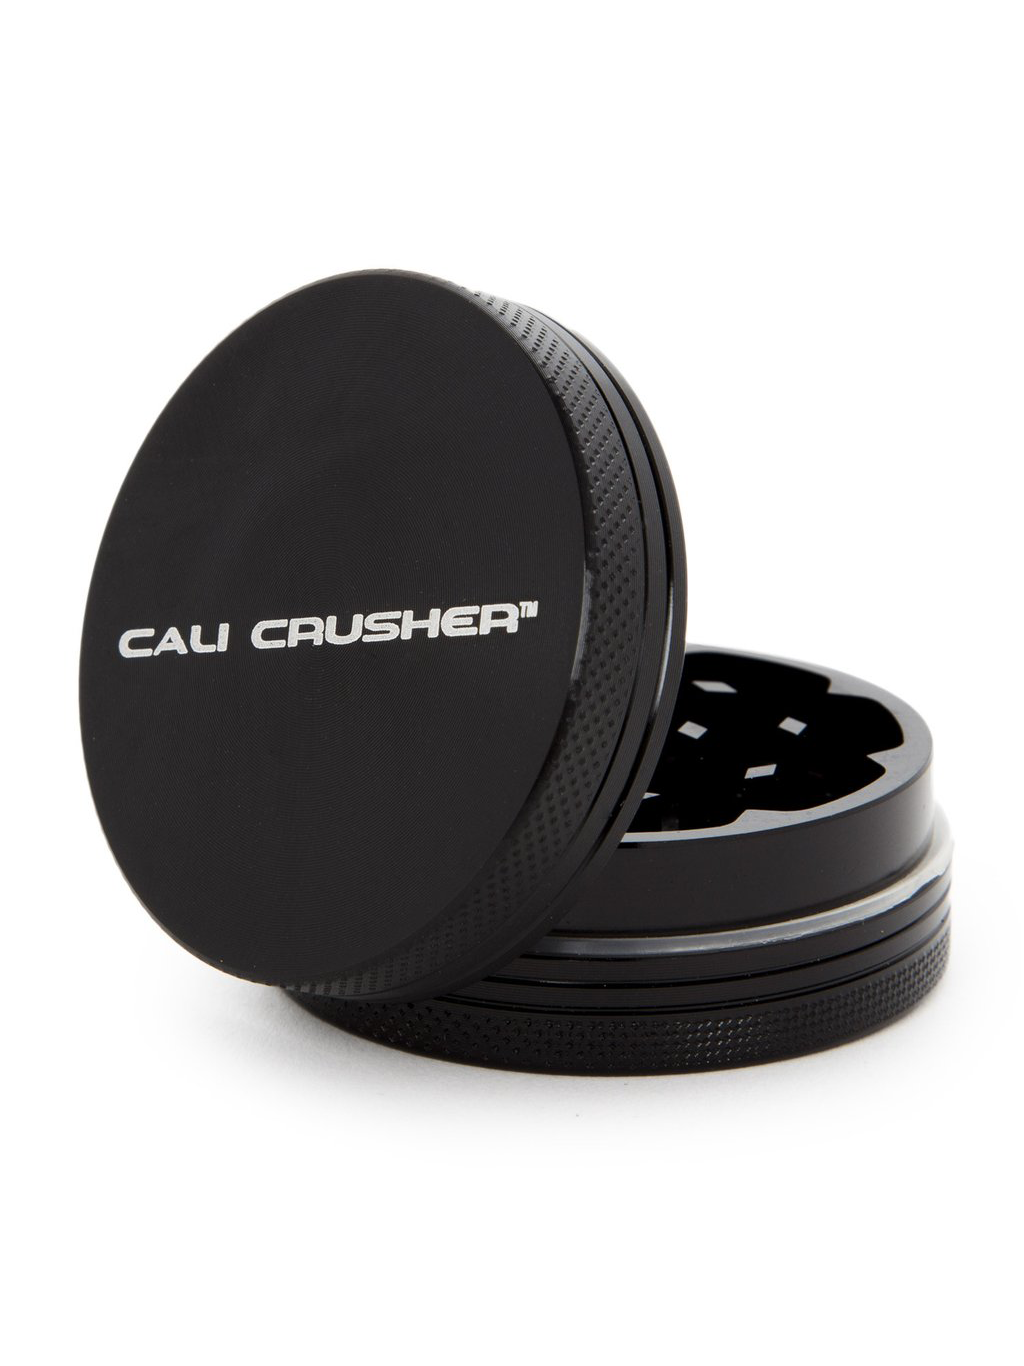 Cali Crusher® 2" 2-Piece Hard Top - Pack of 3